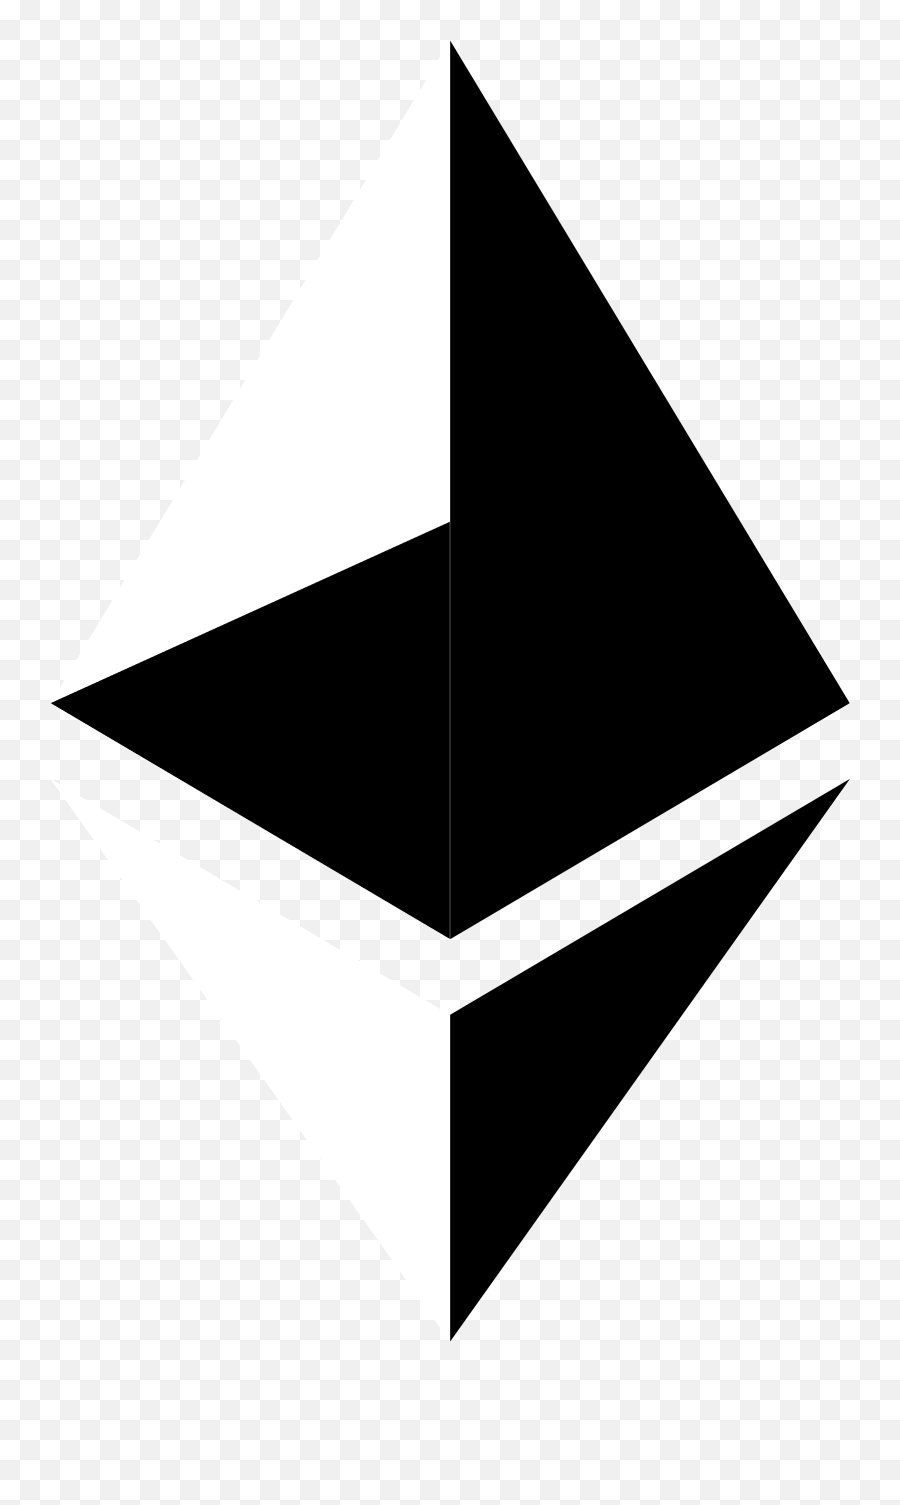 Download Hd Ethereum Logo Black And White - Flecha Recta Flecha Recta Png,Flecha Roja Png